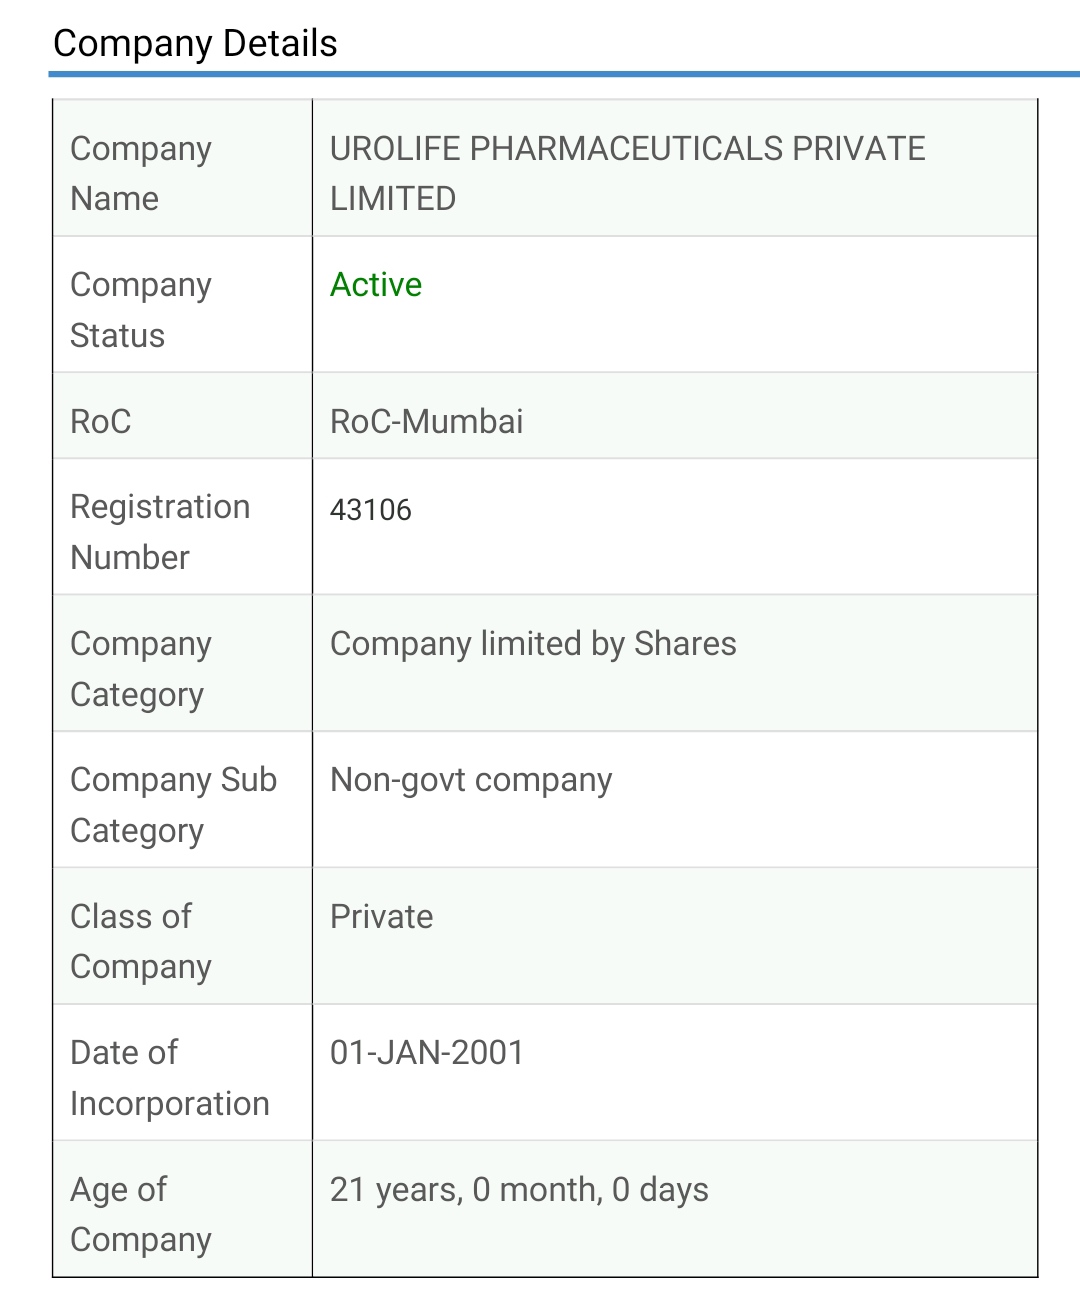 Urolife Pharmaceuticals Private Limited